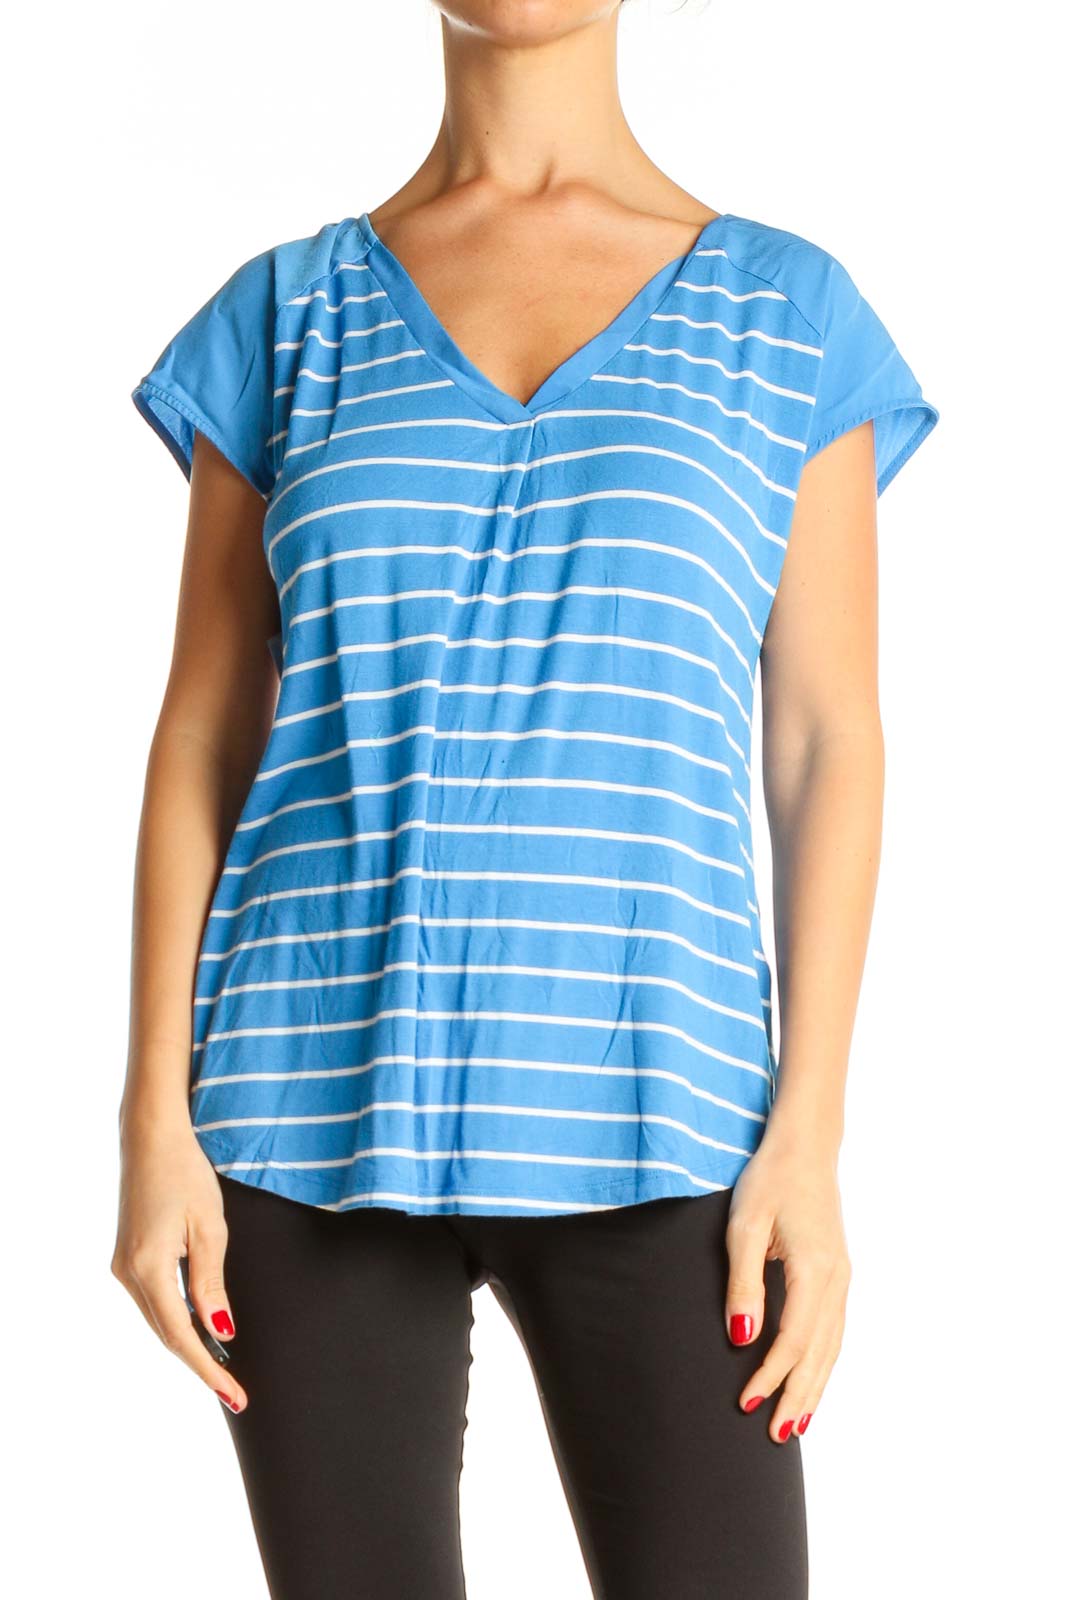 Blue Striped Activewear Top Front